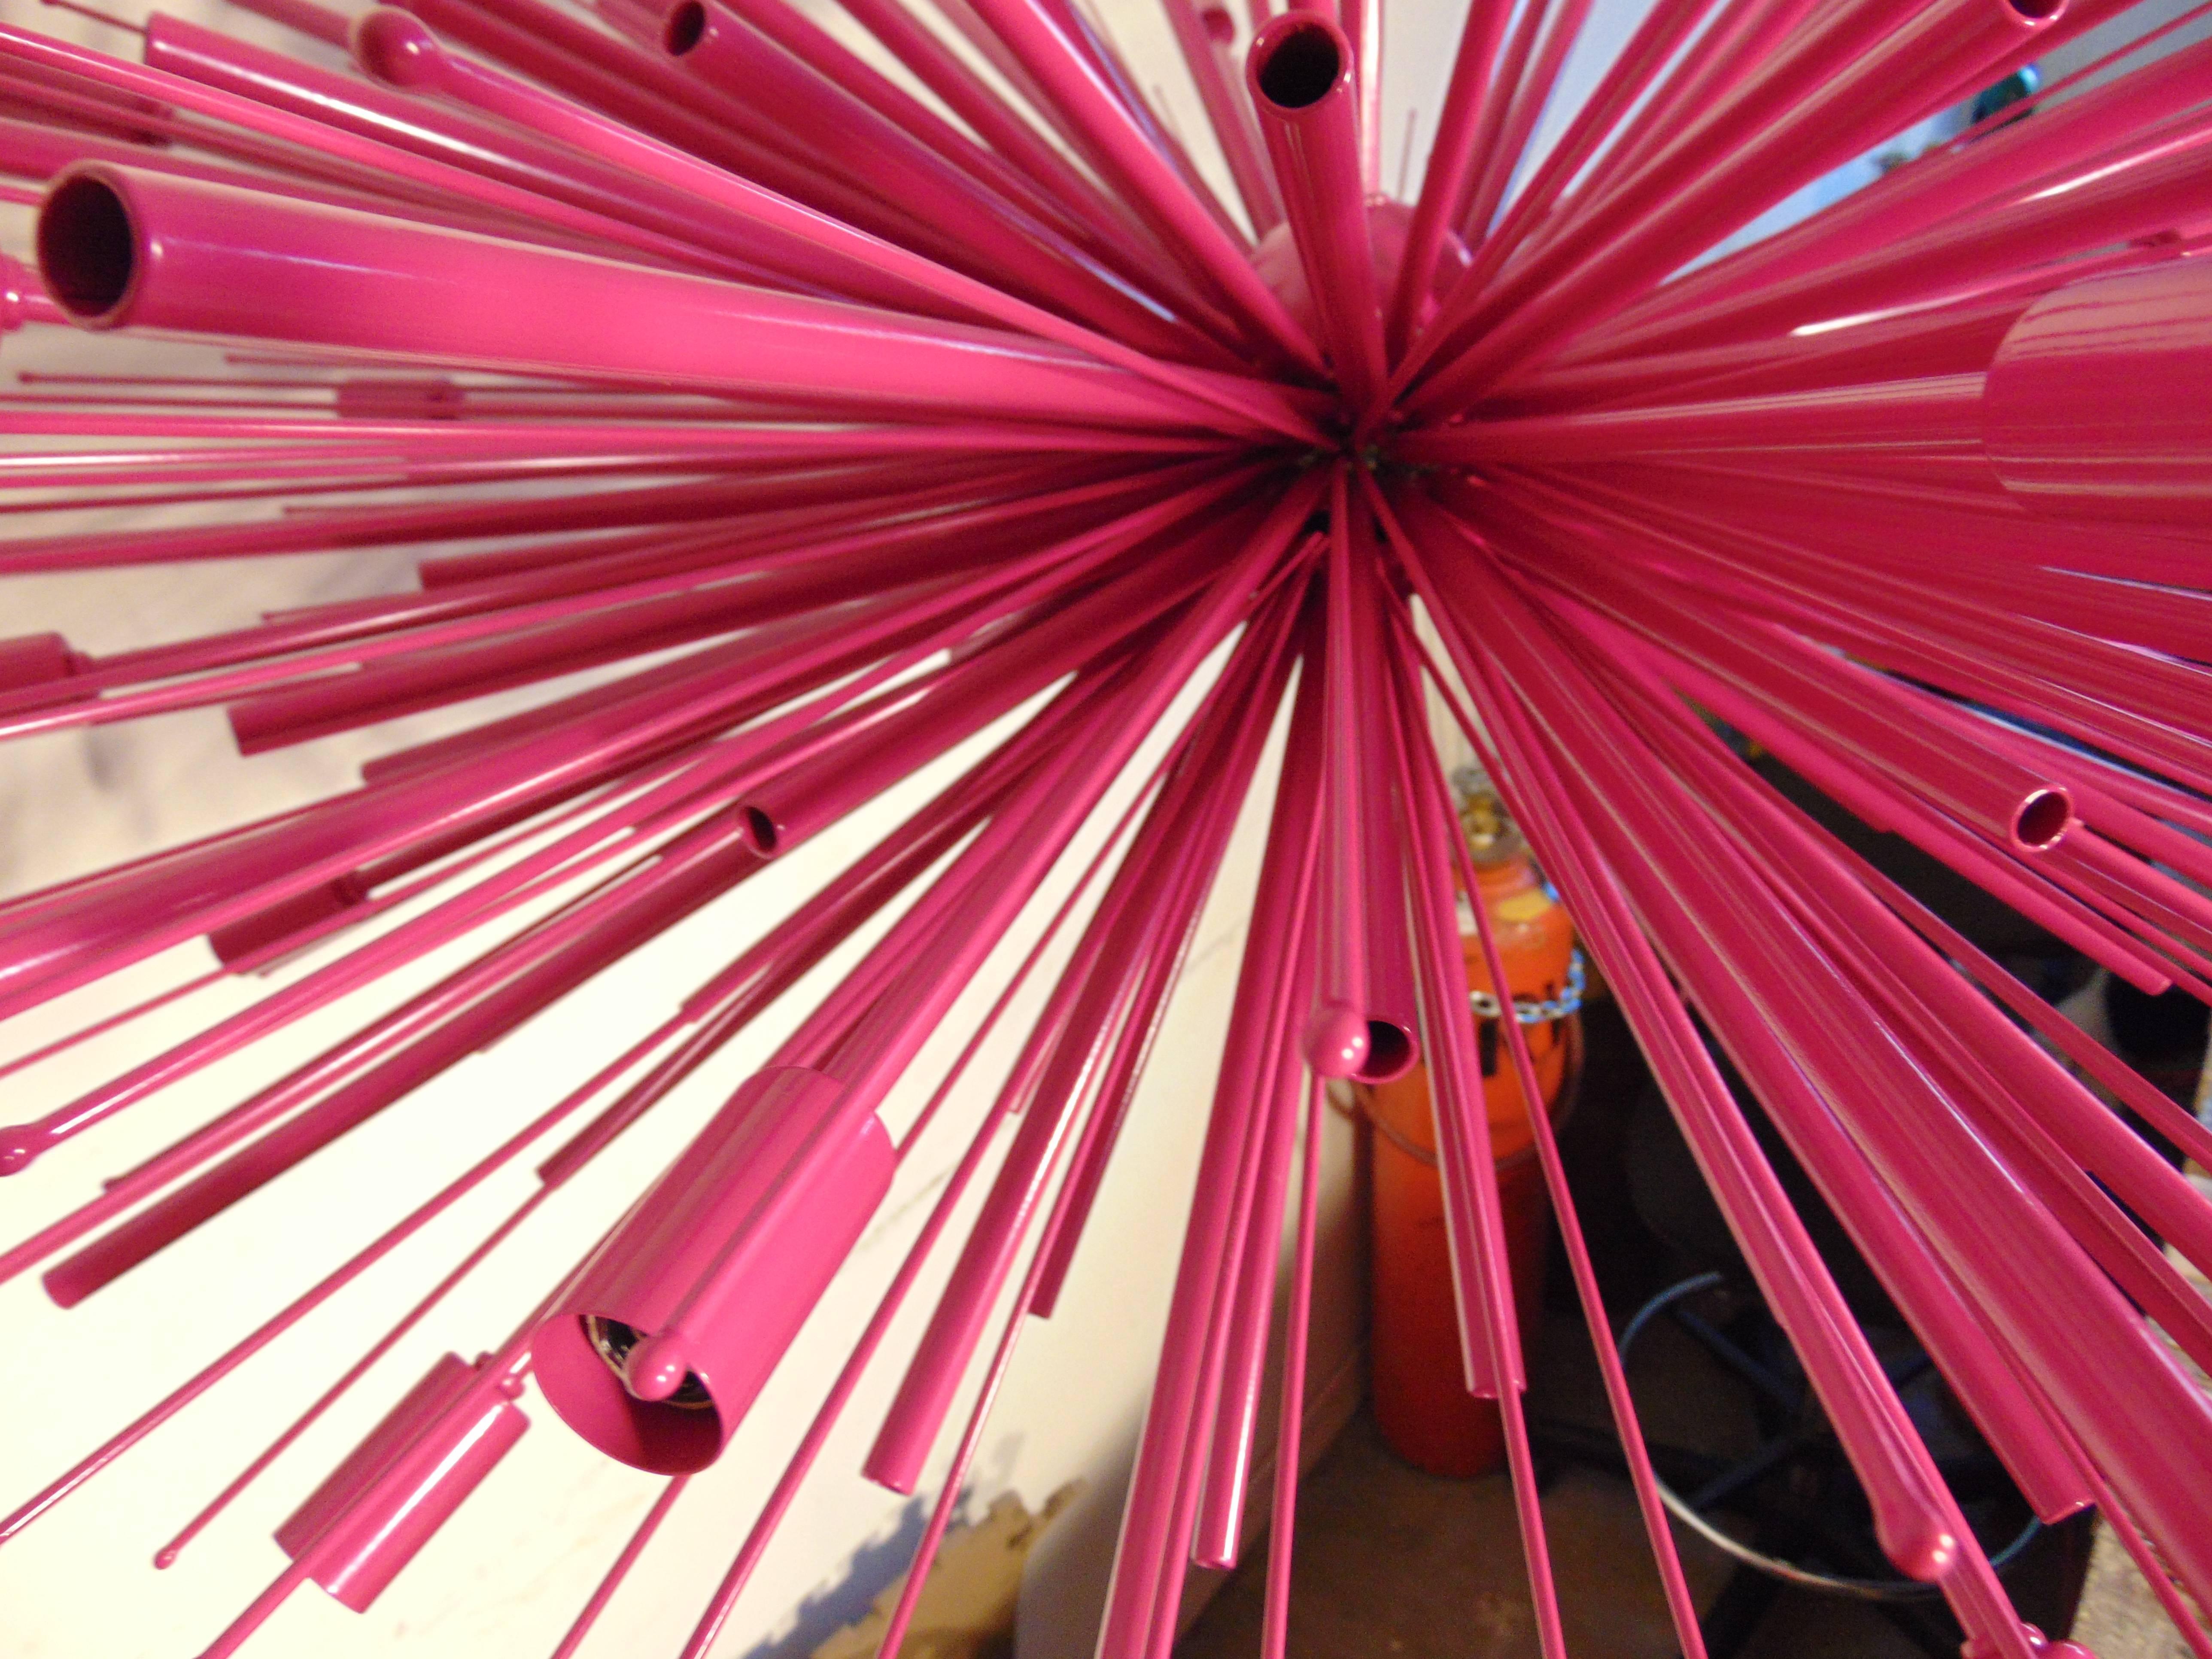 Powder-Coated Wild Fuchsia Supernova by Lou Blass , made in the USA, with 24 lights For Sale